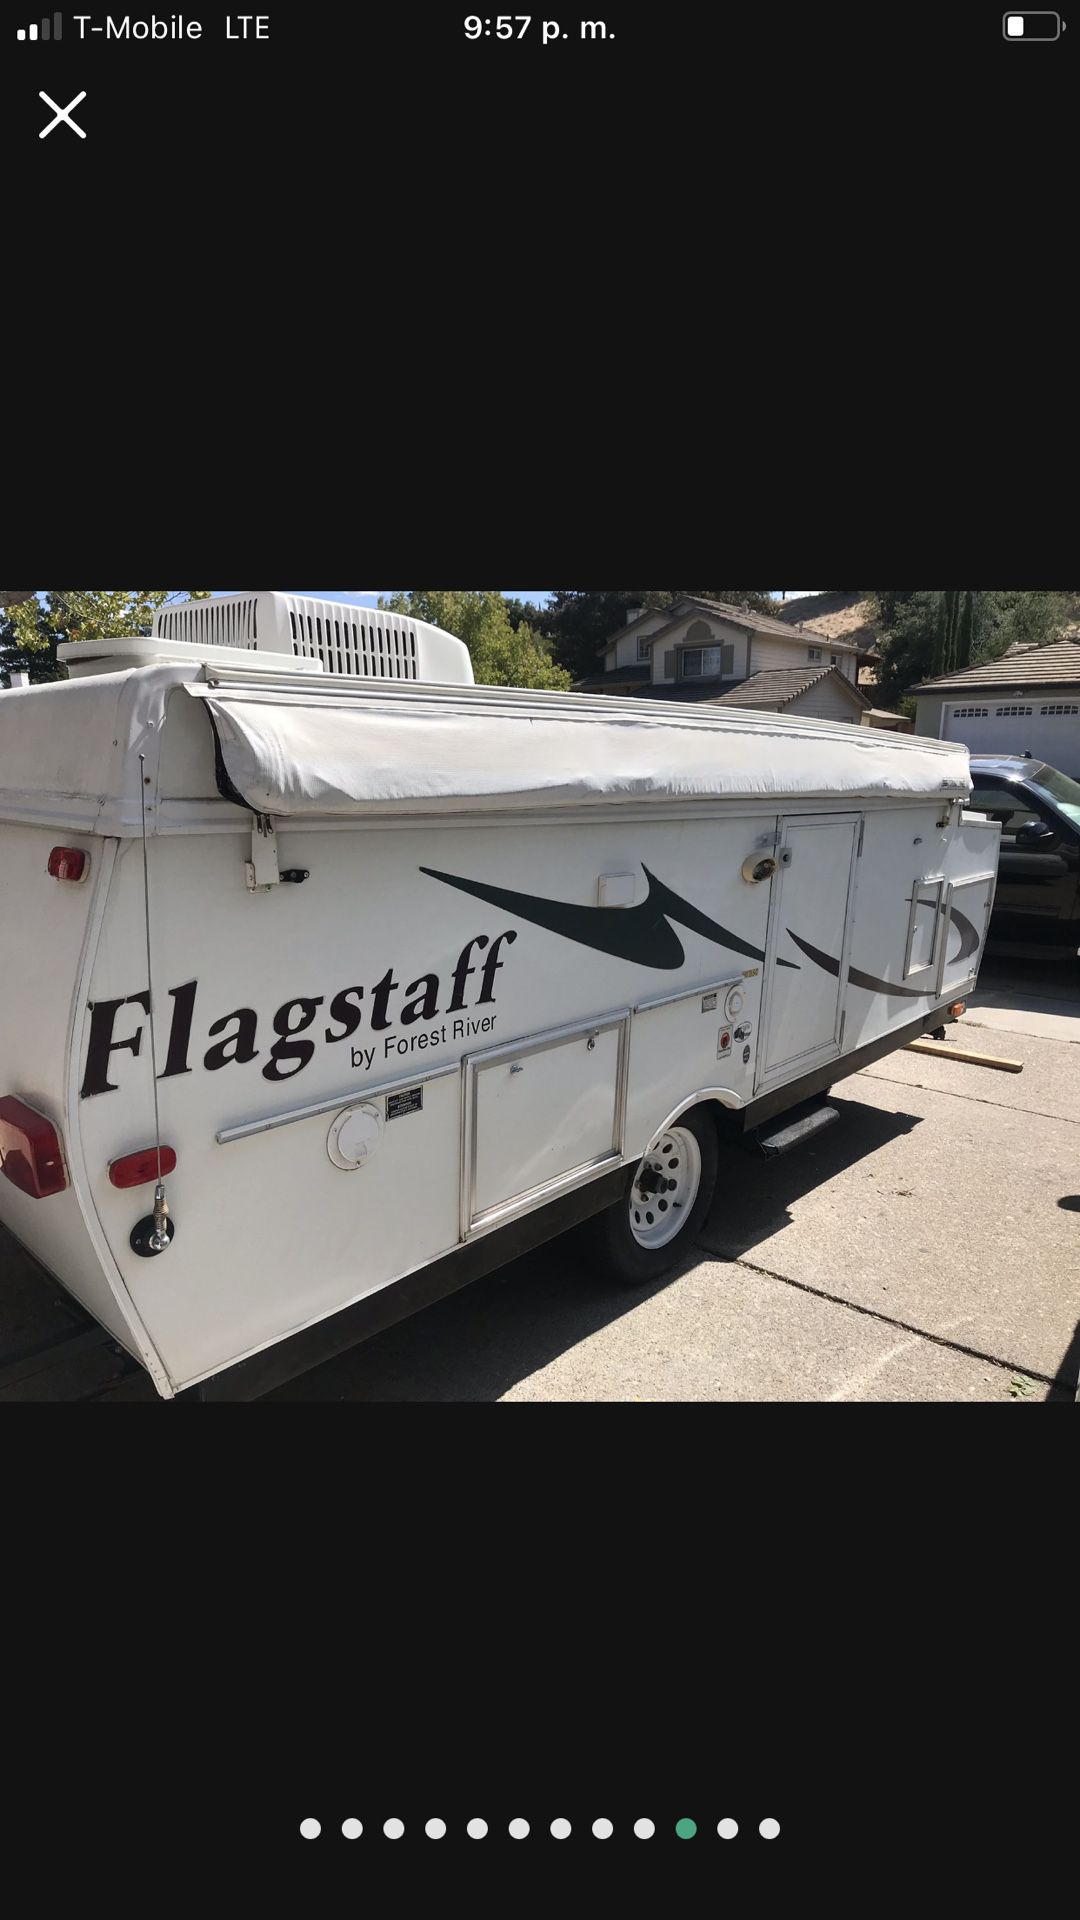 Flagstaff POP UP Camper For Sale - ZeRVs 1990 King Of The Road 5th Wheel